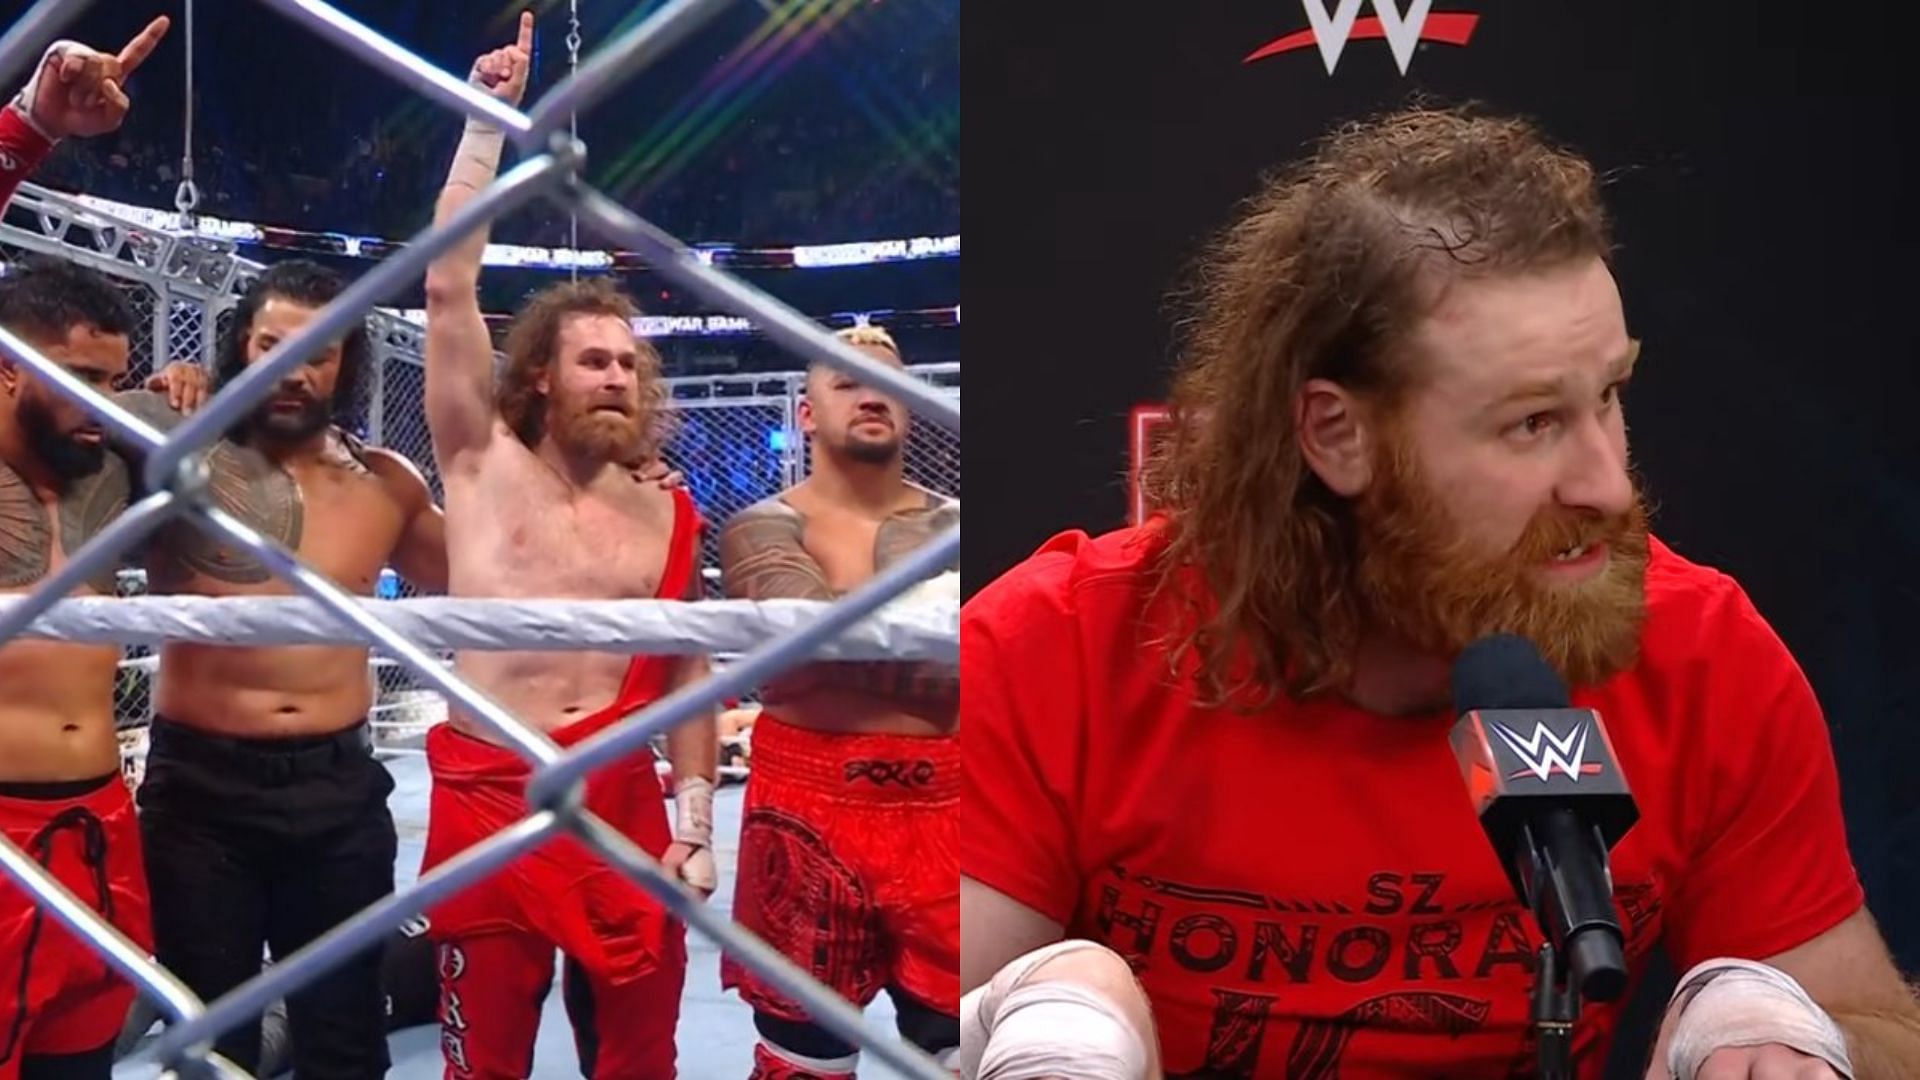 Sami Zayn proved his loyalty to The Bloodline at Survivor Series WarGames.